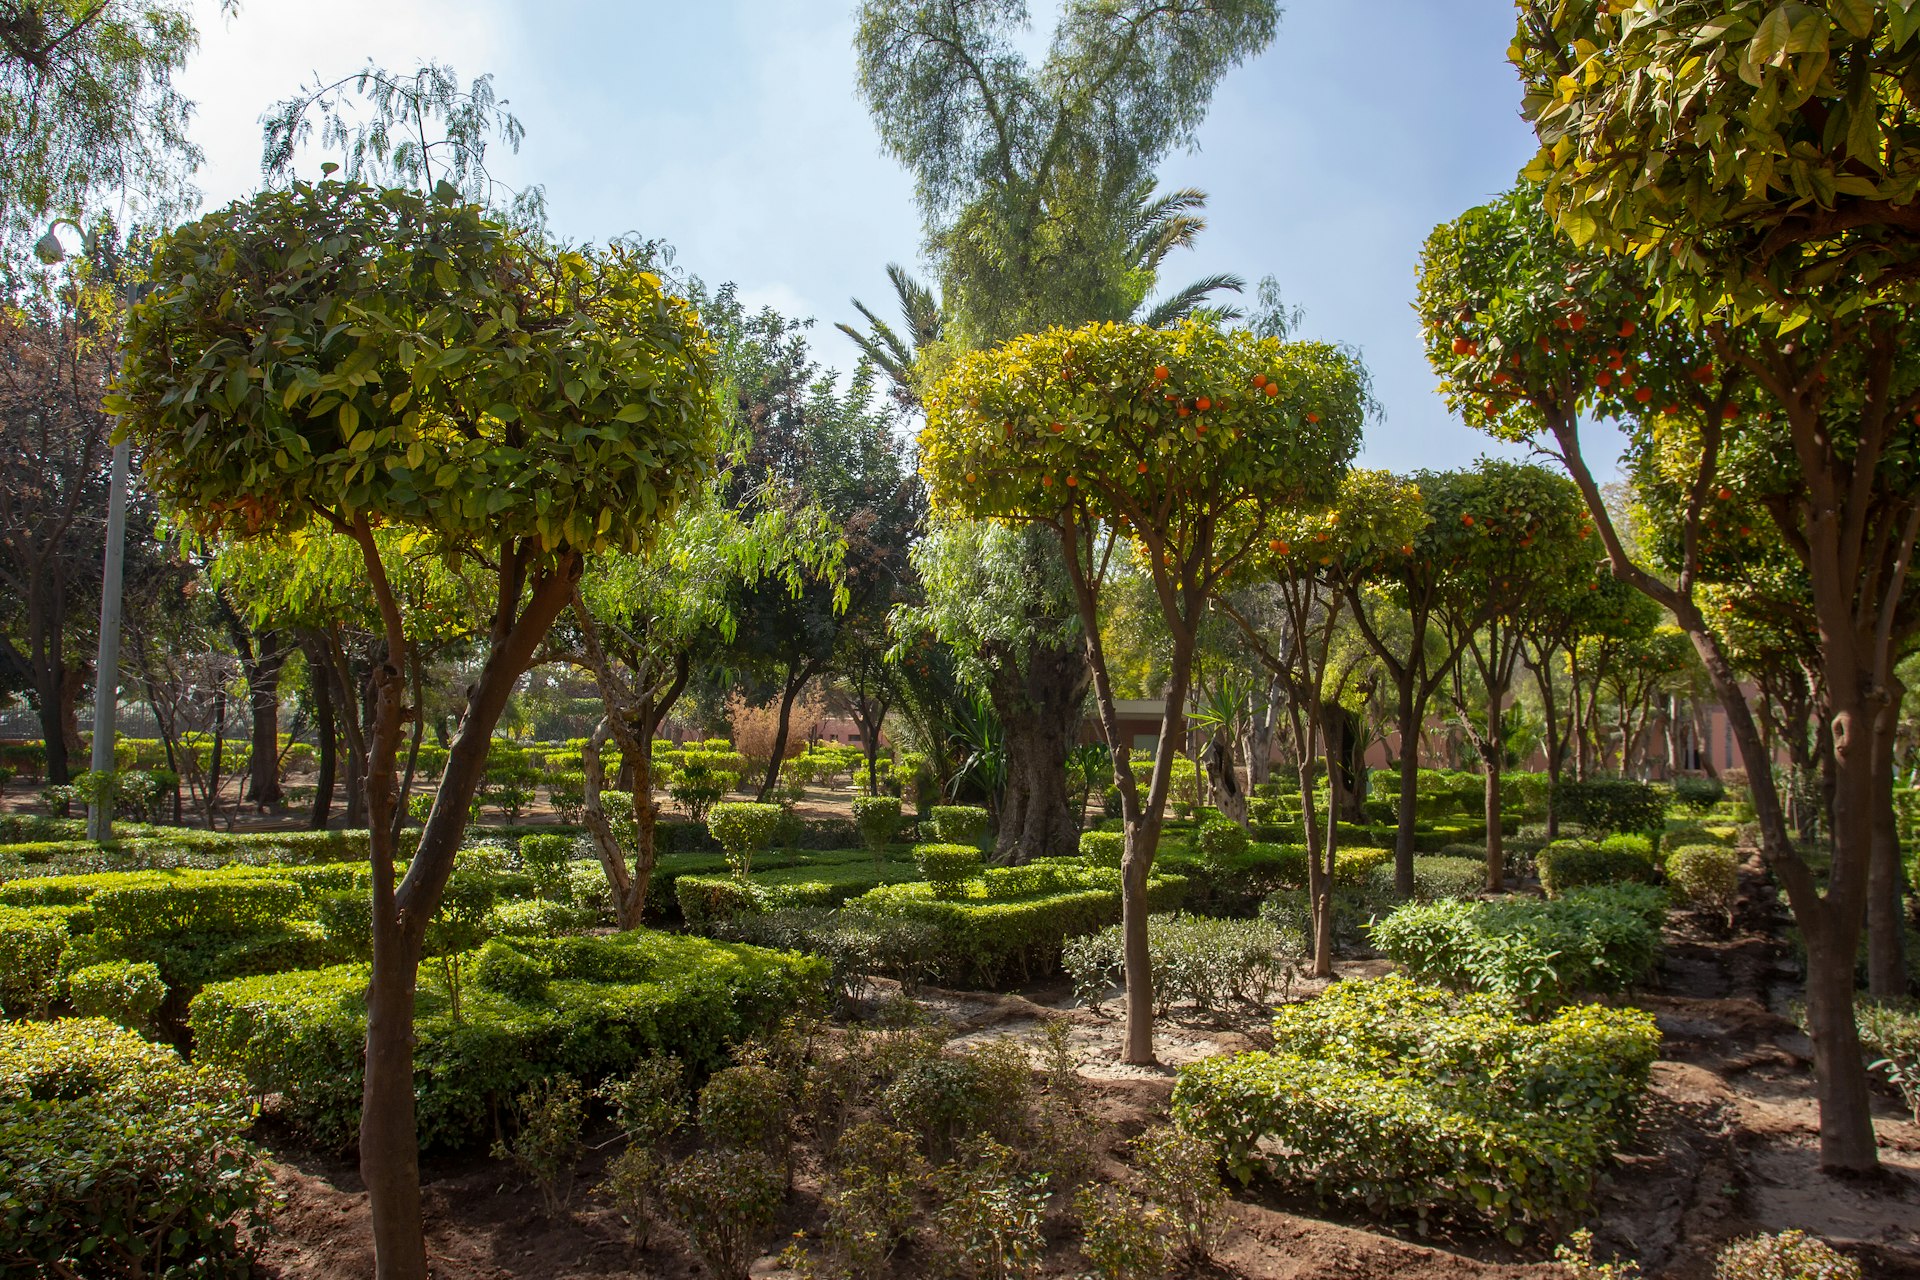 Orange trees and plants in Cyber Park in Marrakesh, Morocco